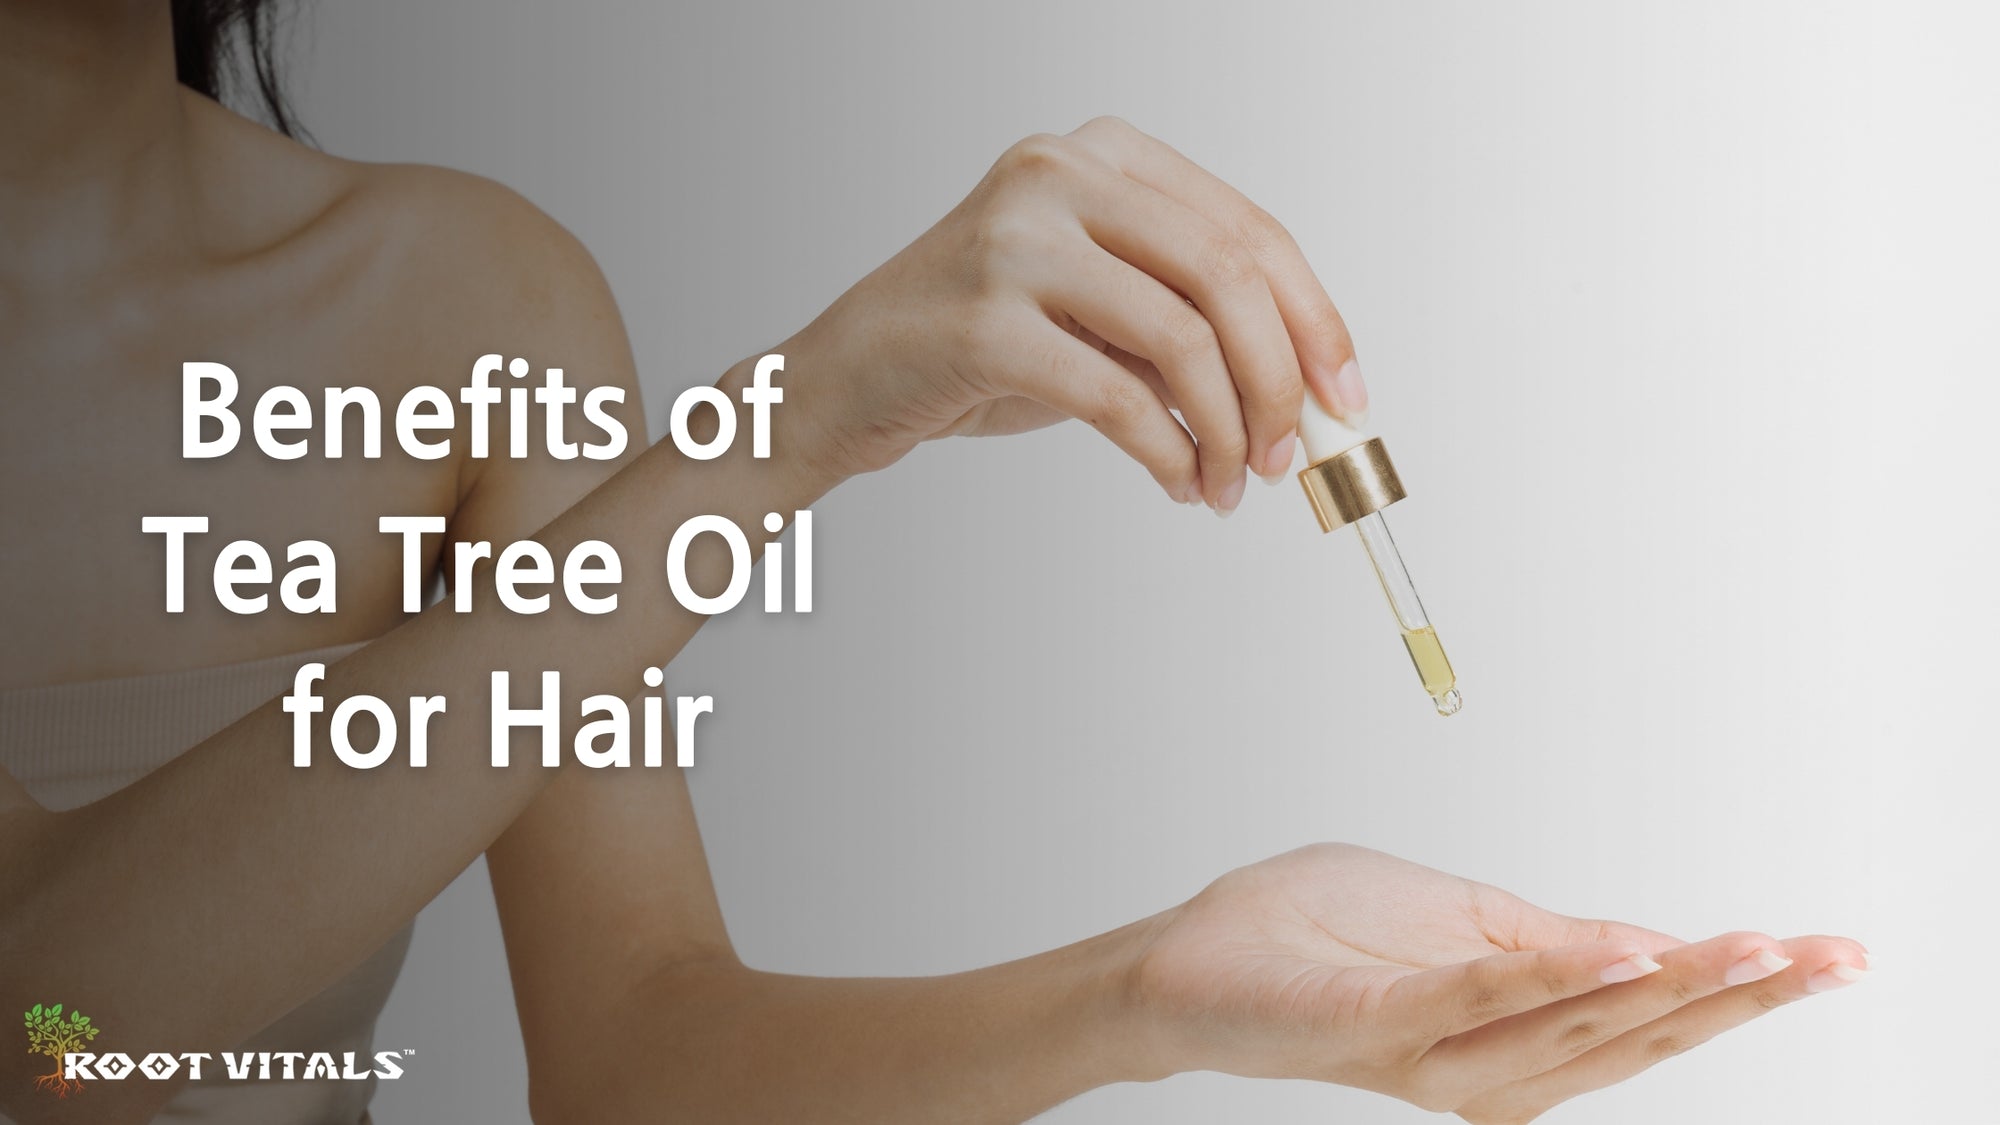 Benefits of Tea Tree Oil for Hair